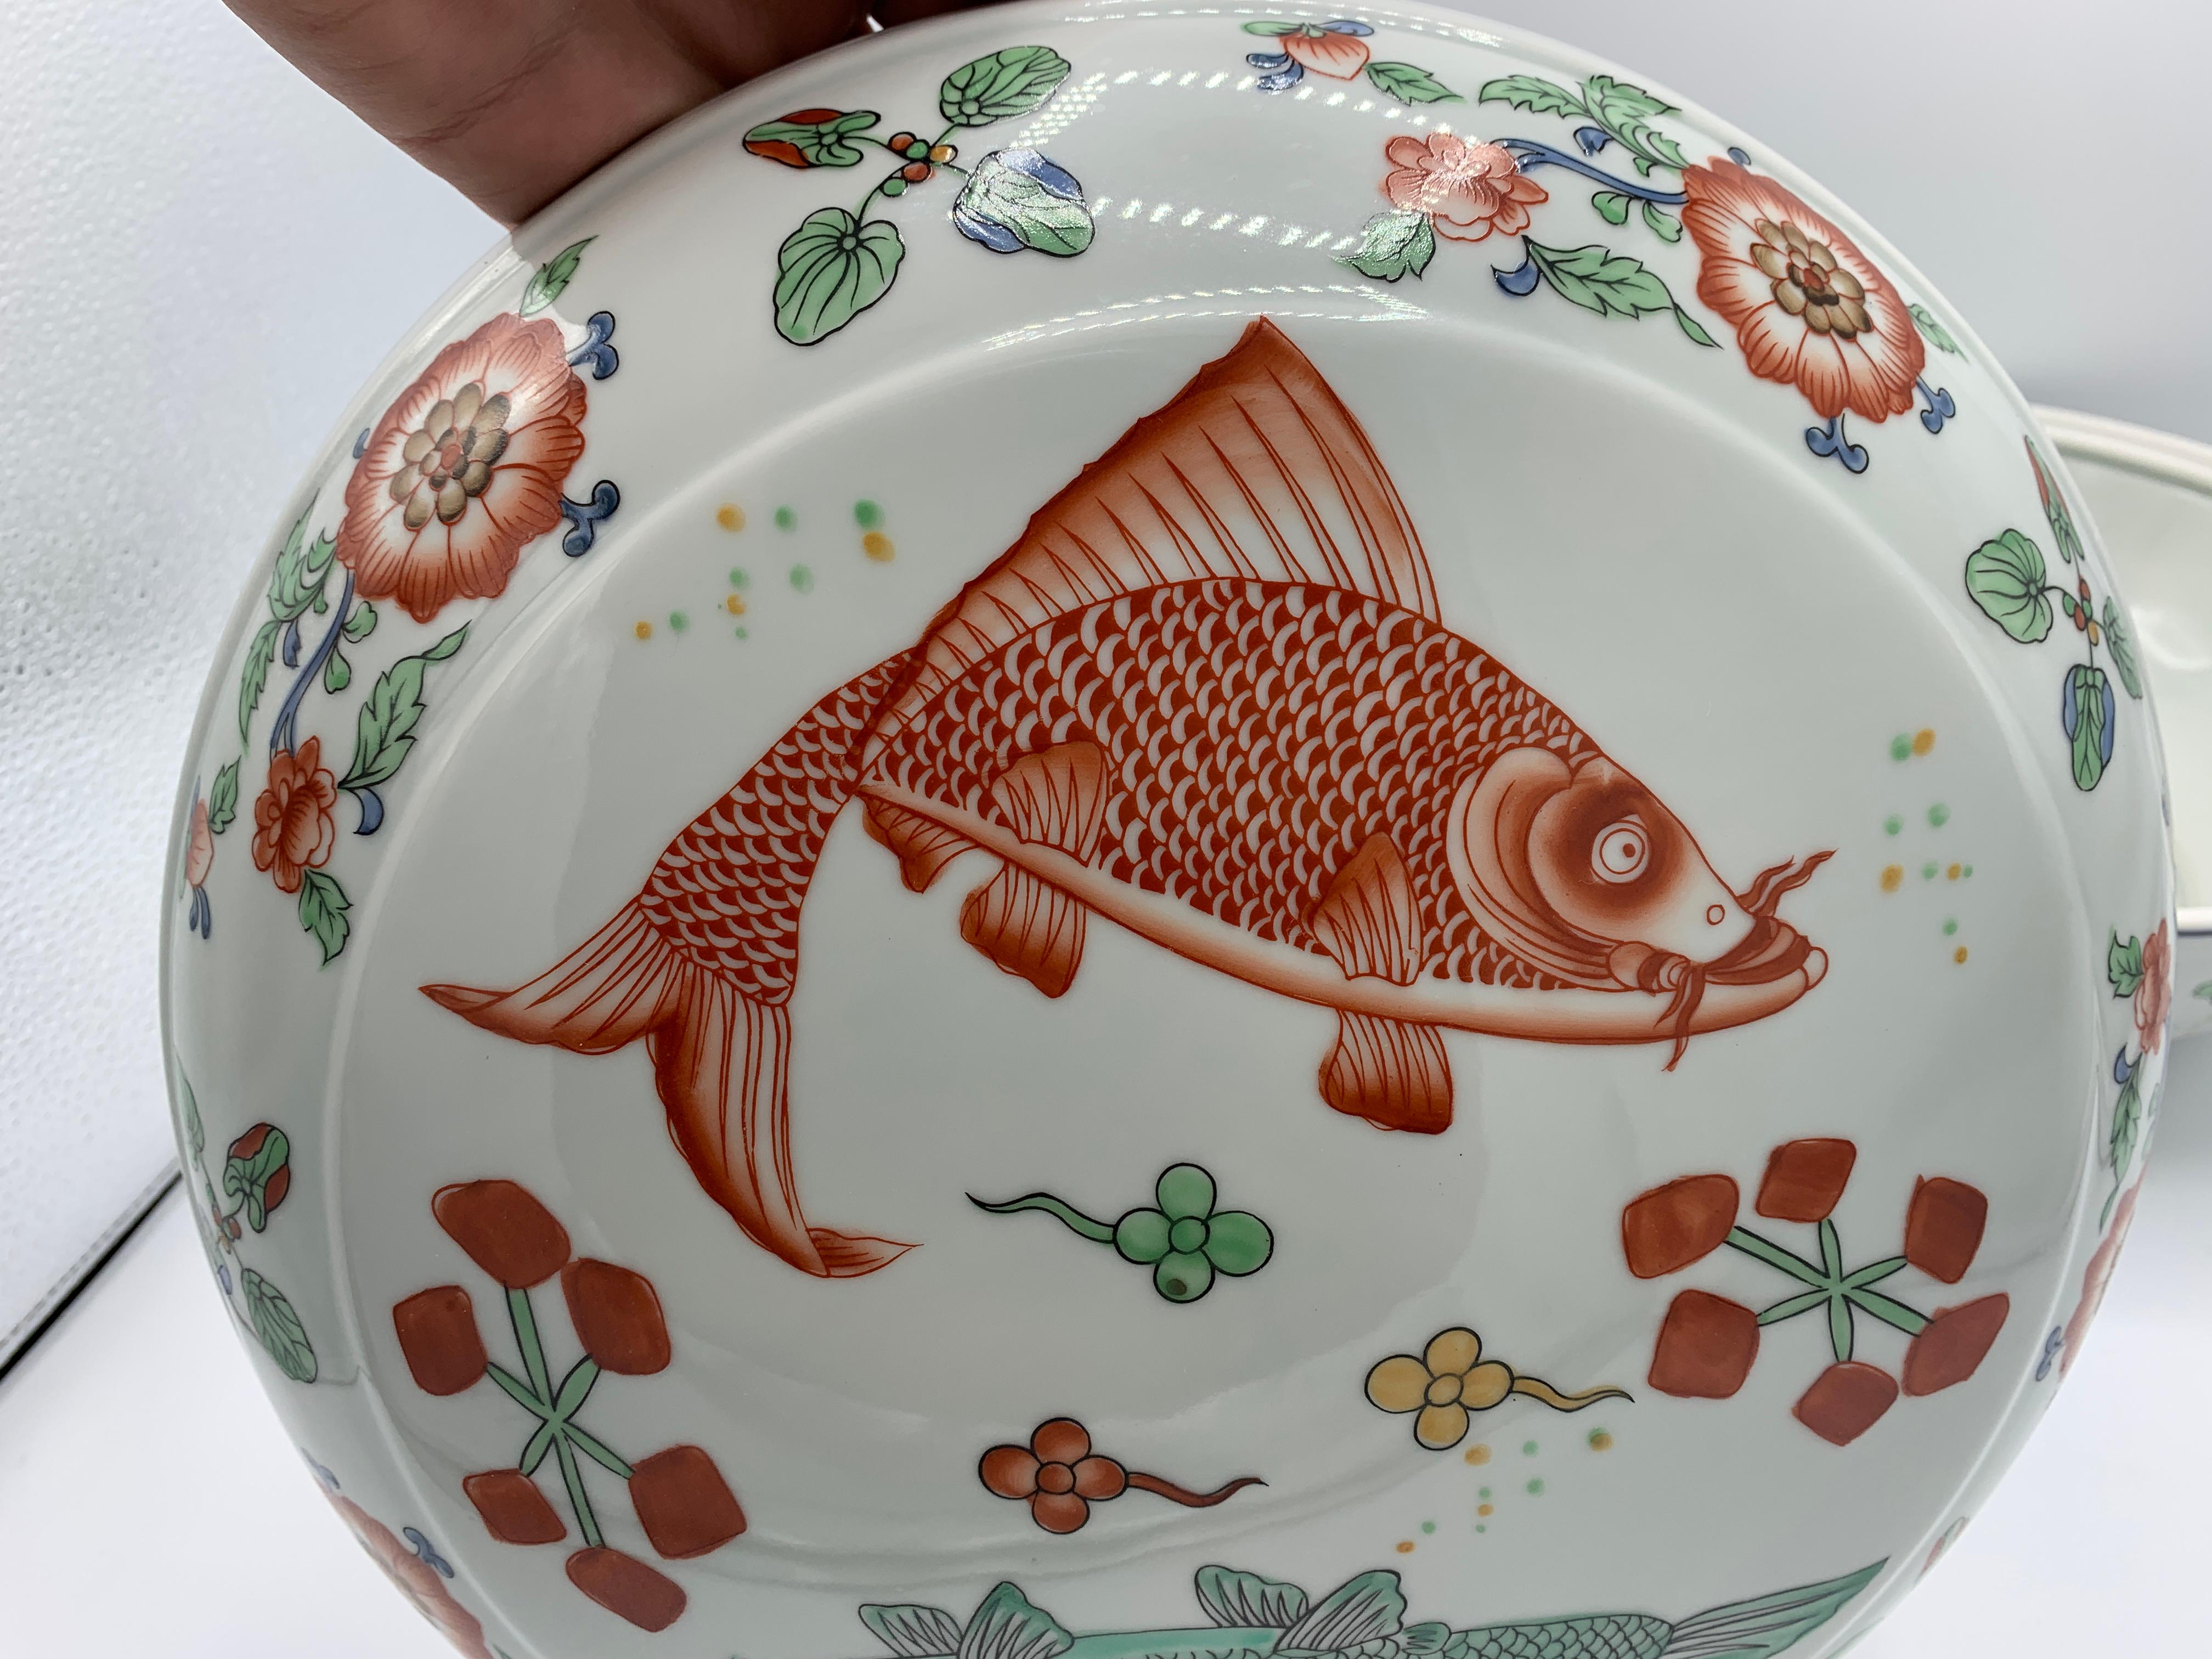 1960s Porcelain Lidded Bowl with Chinoiserie Fish Motif For Sale 2